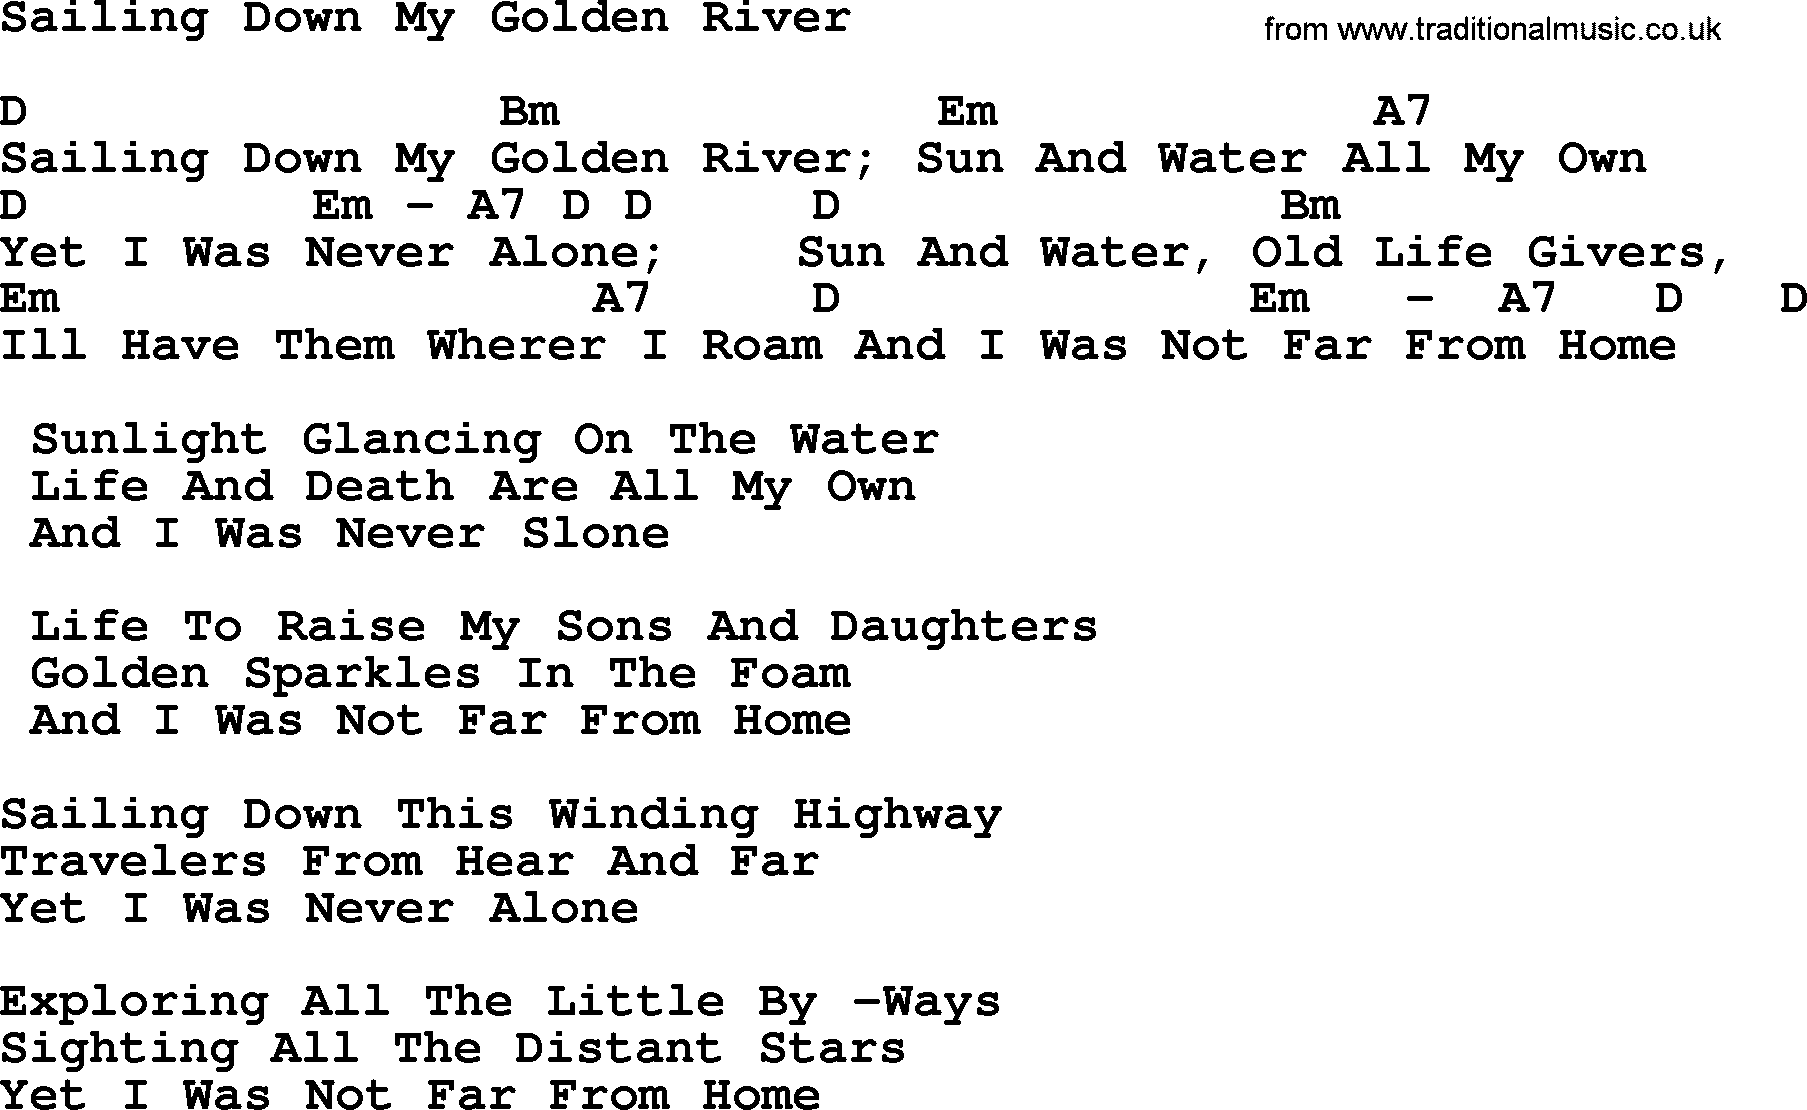 Pete Seeger song Sailing Down My Golden River, lyrics and chords